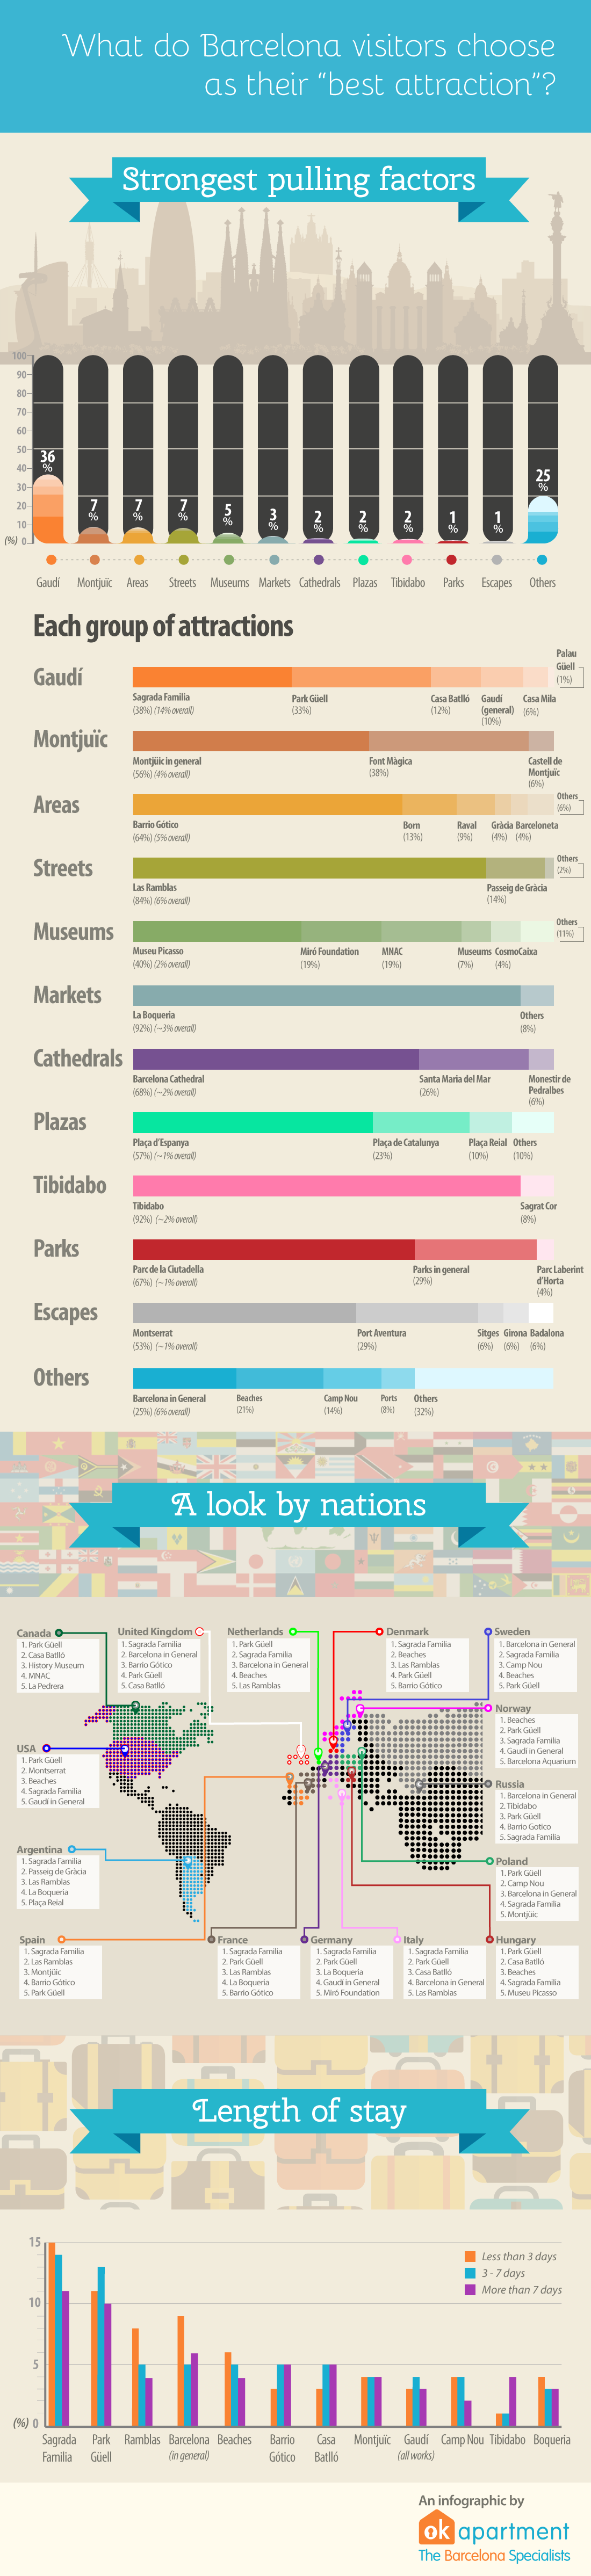 (Survey + Infographic) Best of Barcelona. Do the results surprise you?